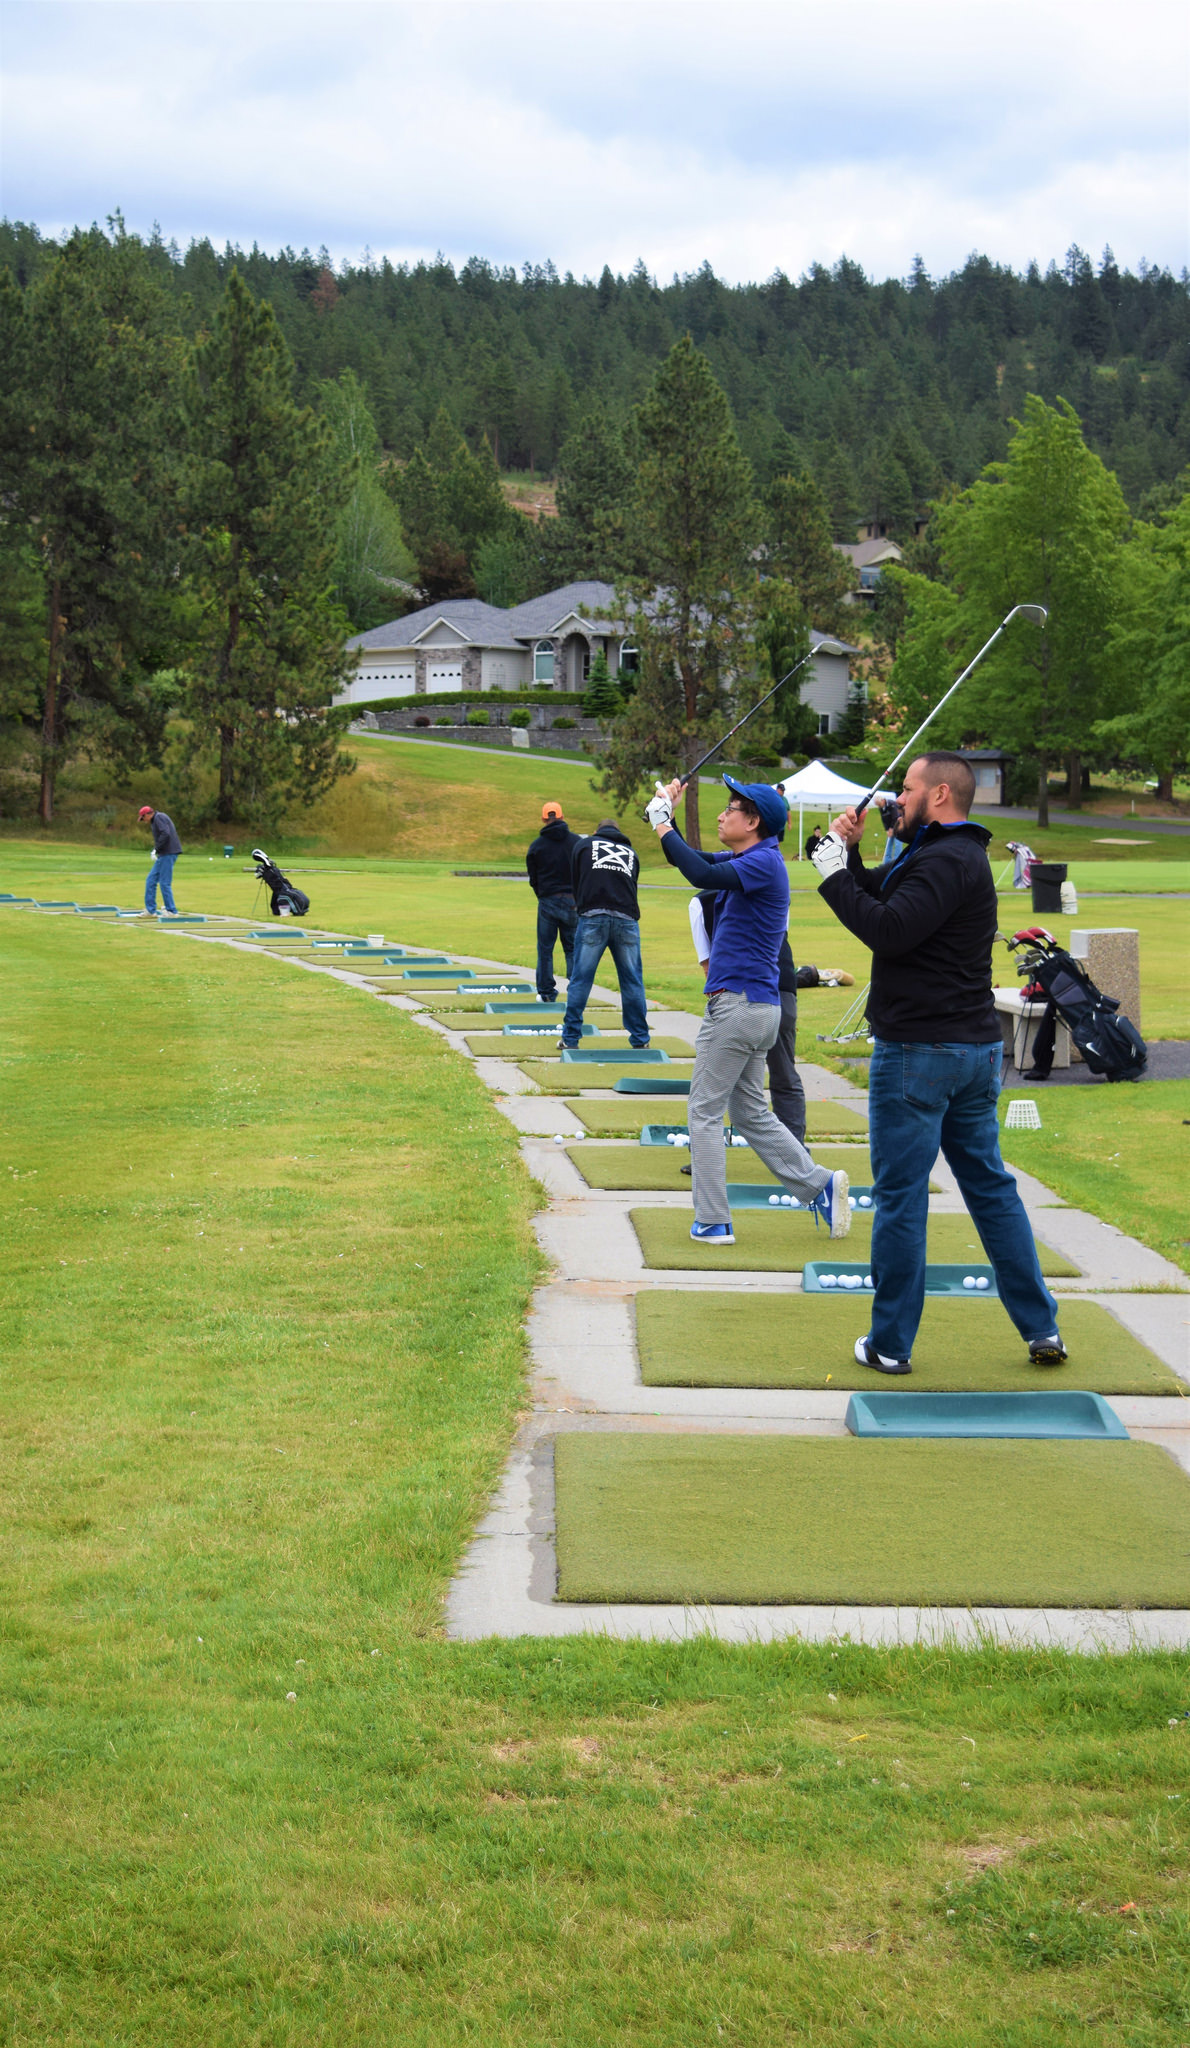 Golf players line up to practice swinging